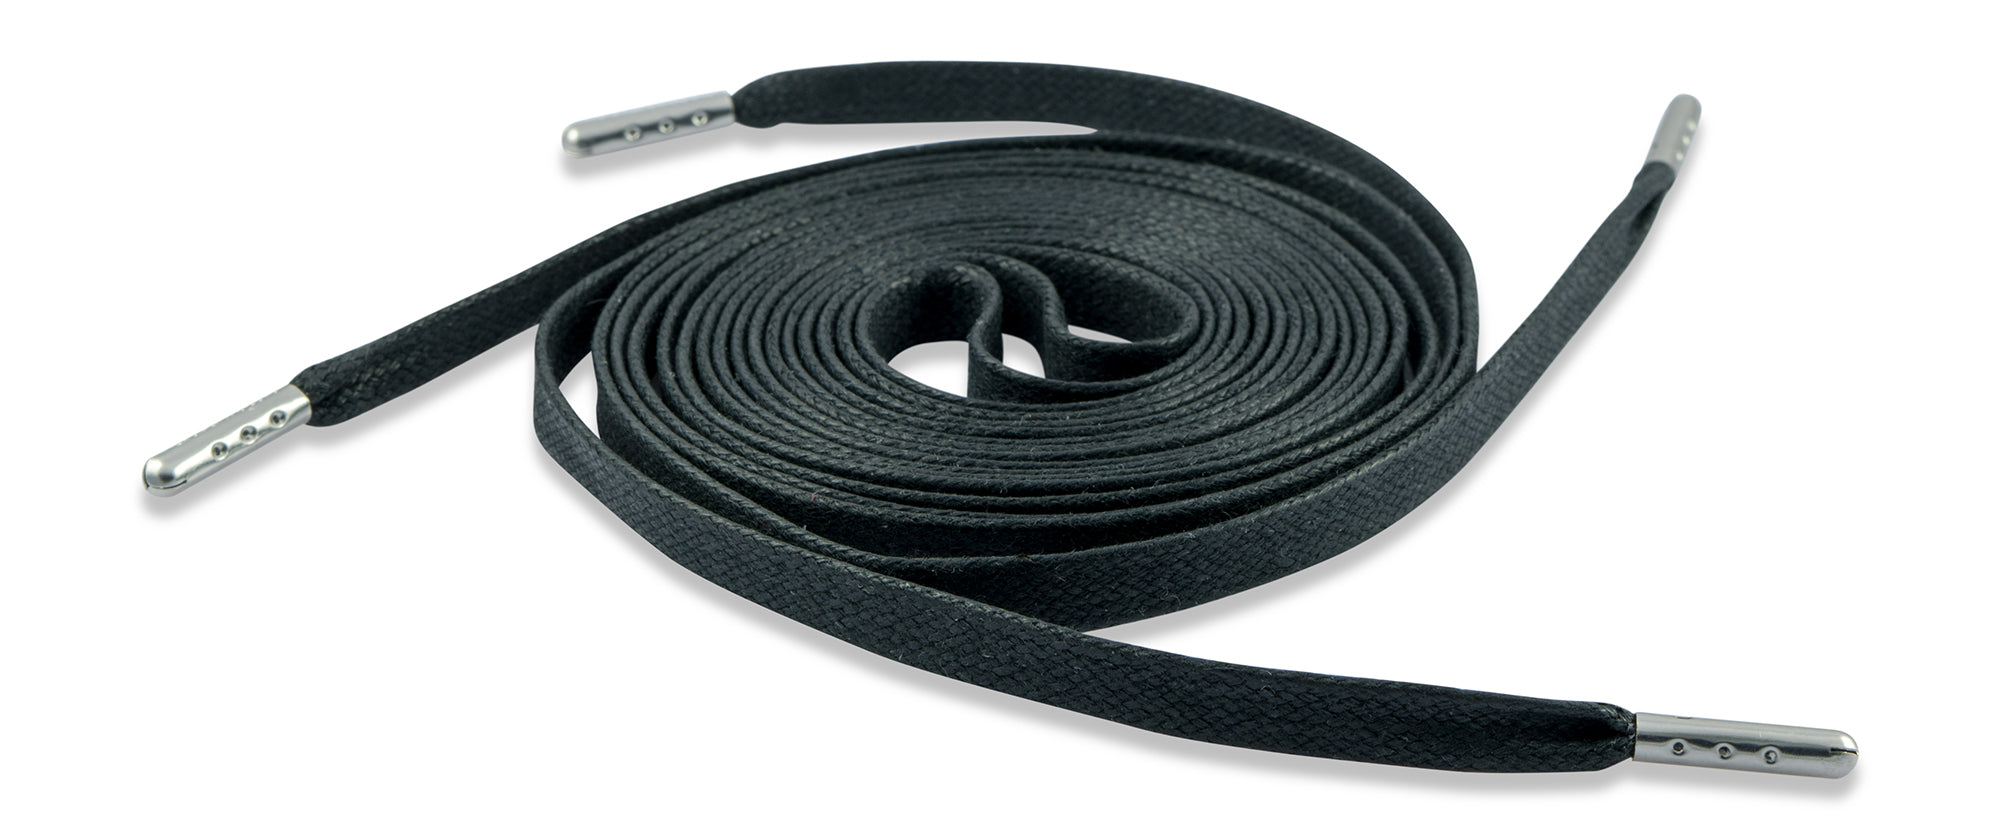 Flat Waxed Athletic Shoelaces - Black with Silver Tips